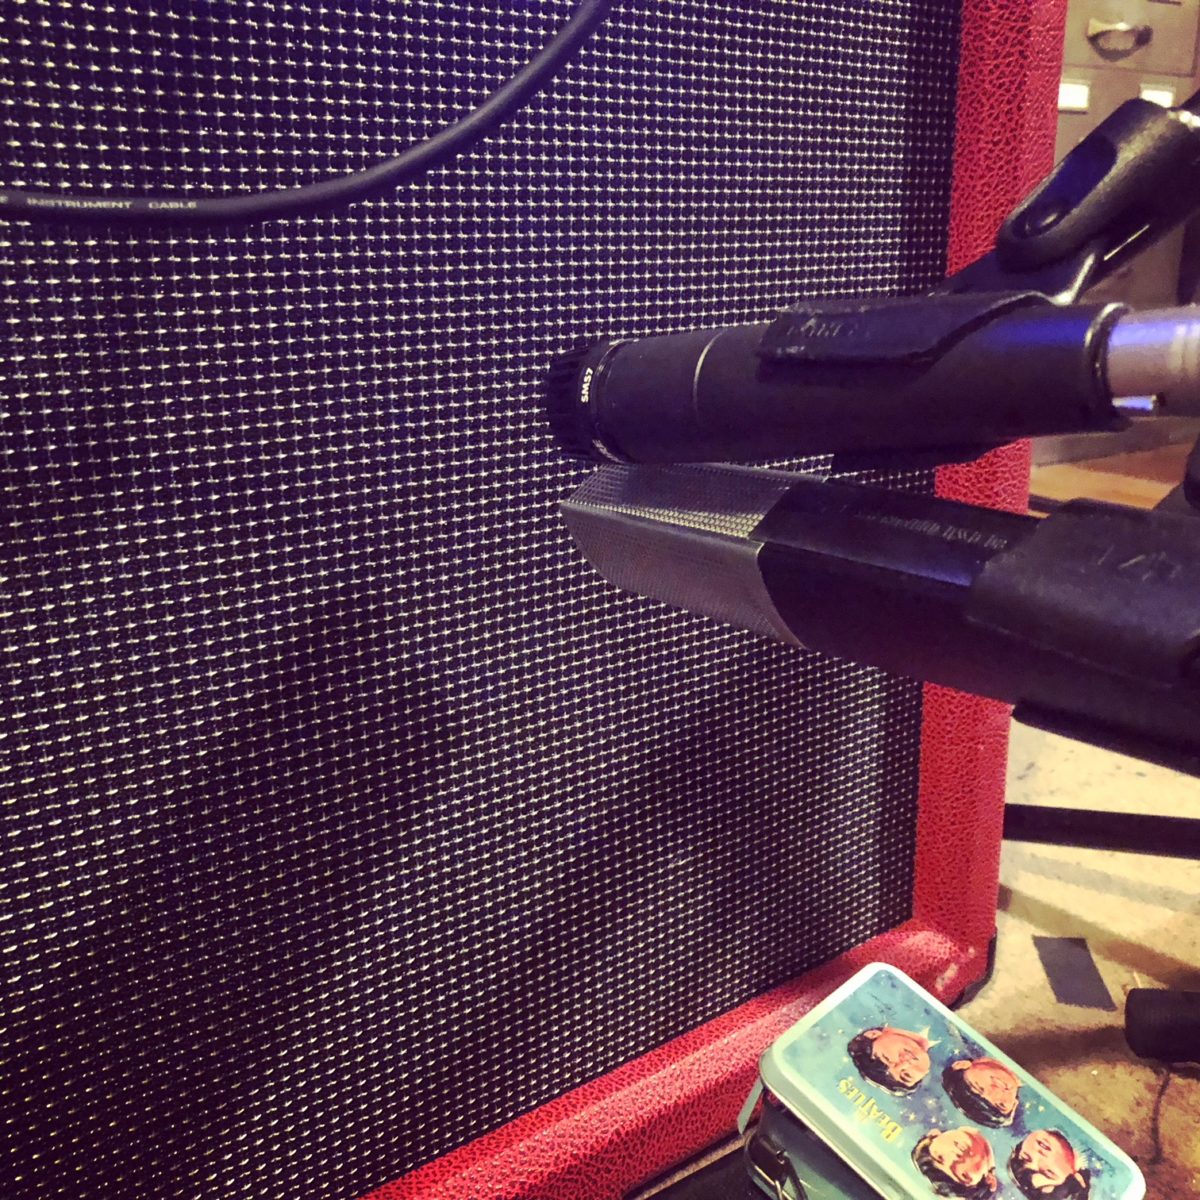 Placement of the SM57 and MD441 on guitar cabinet